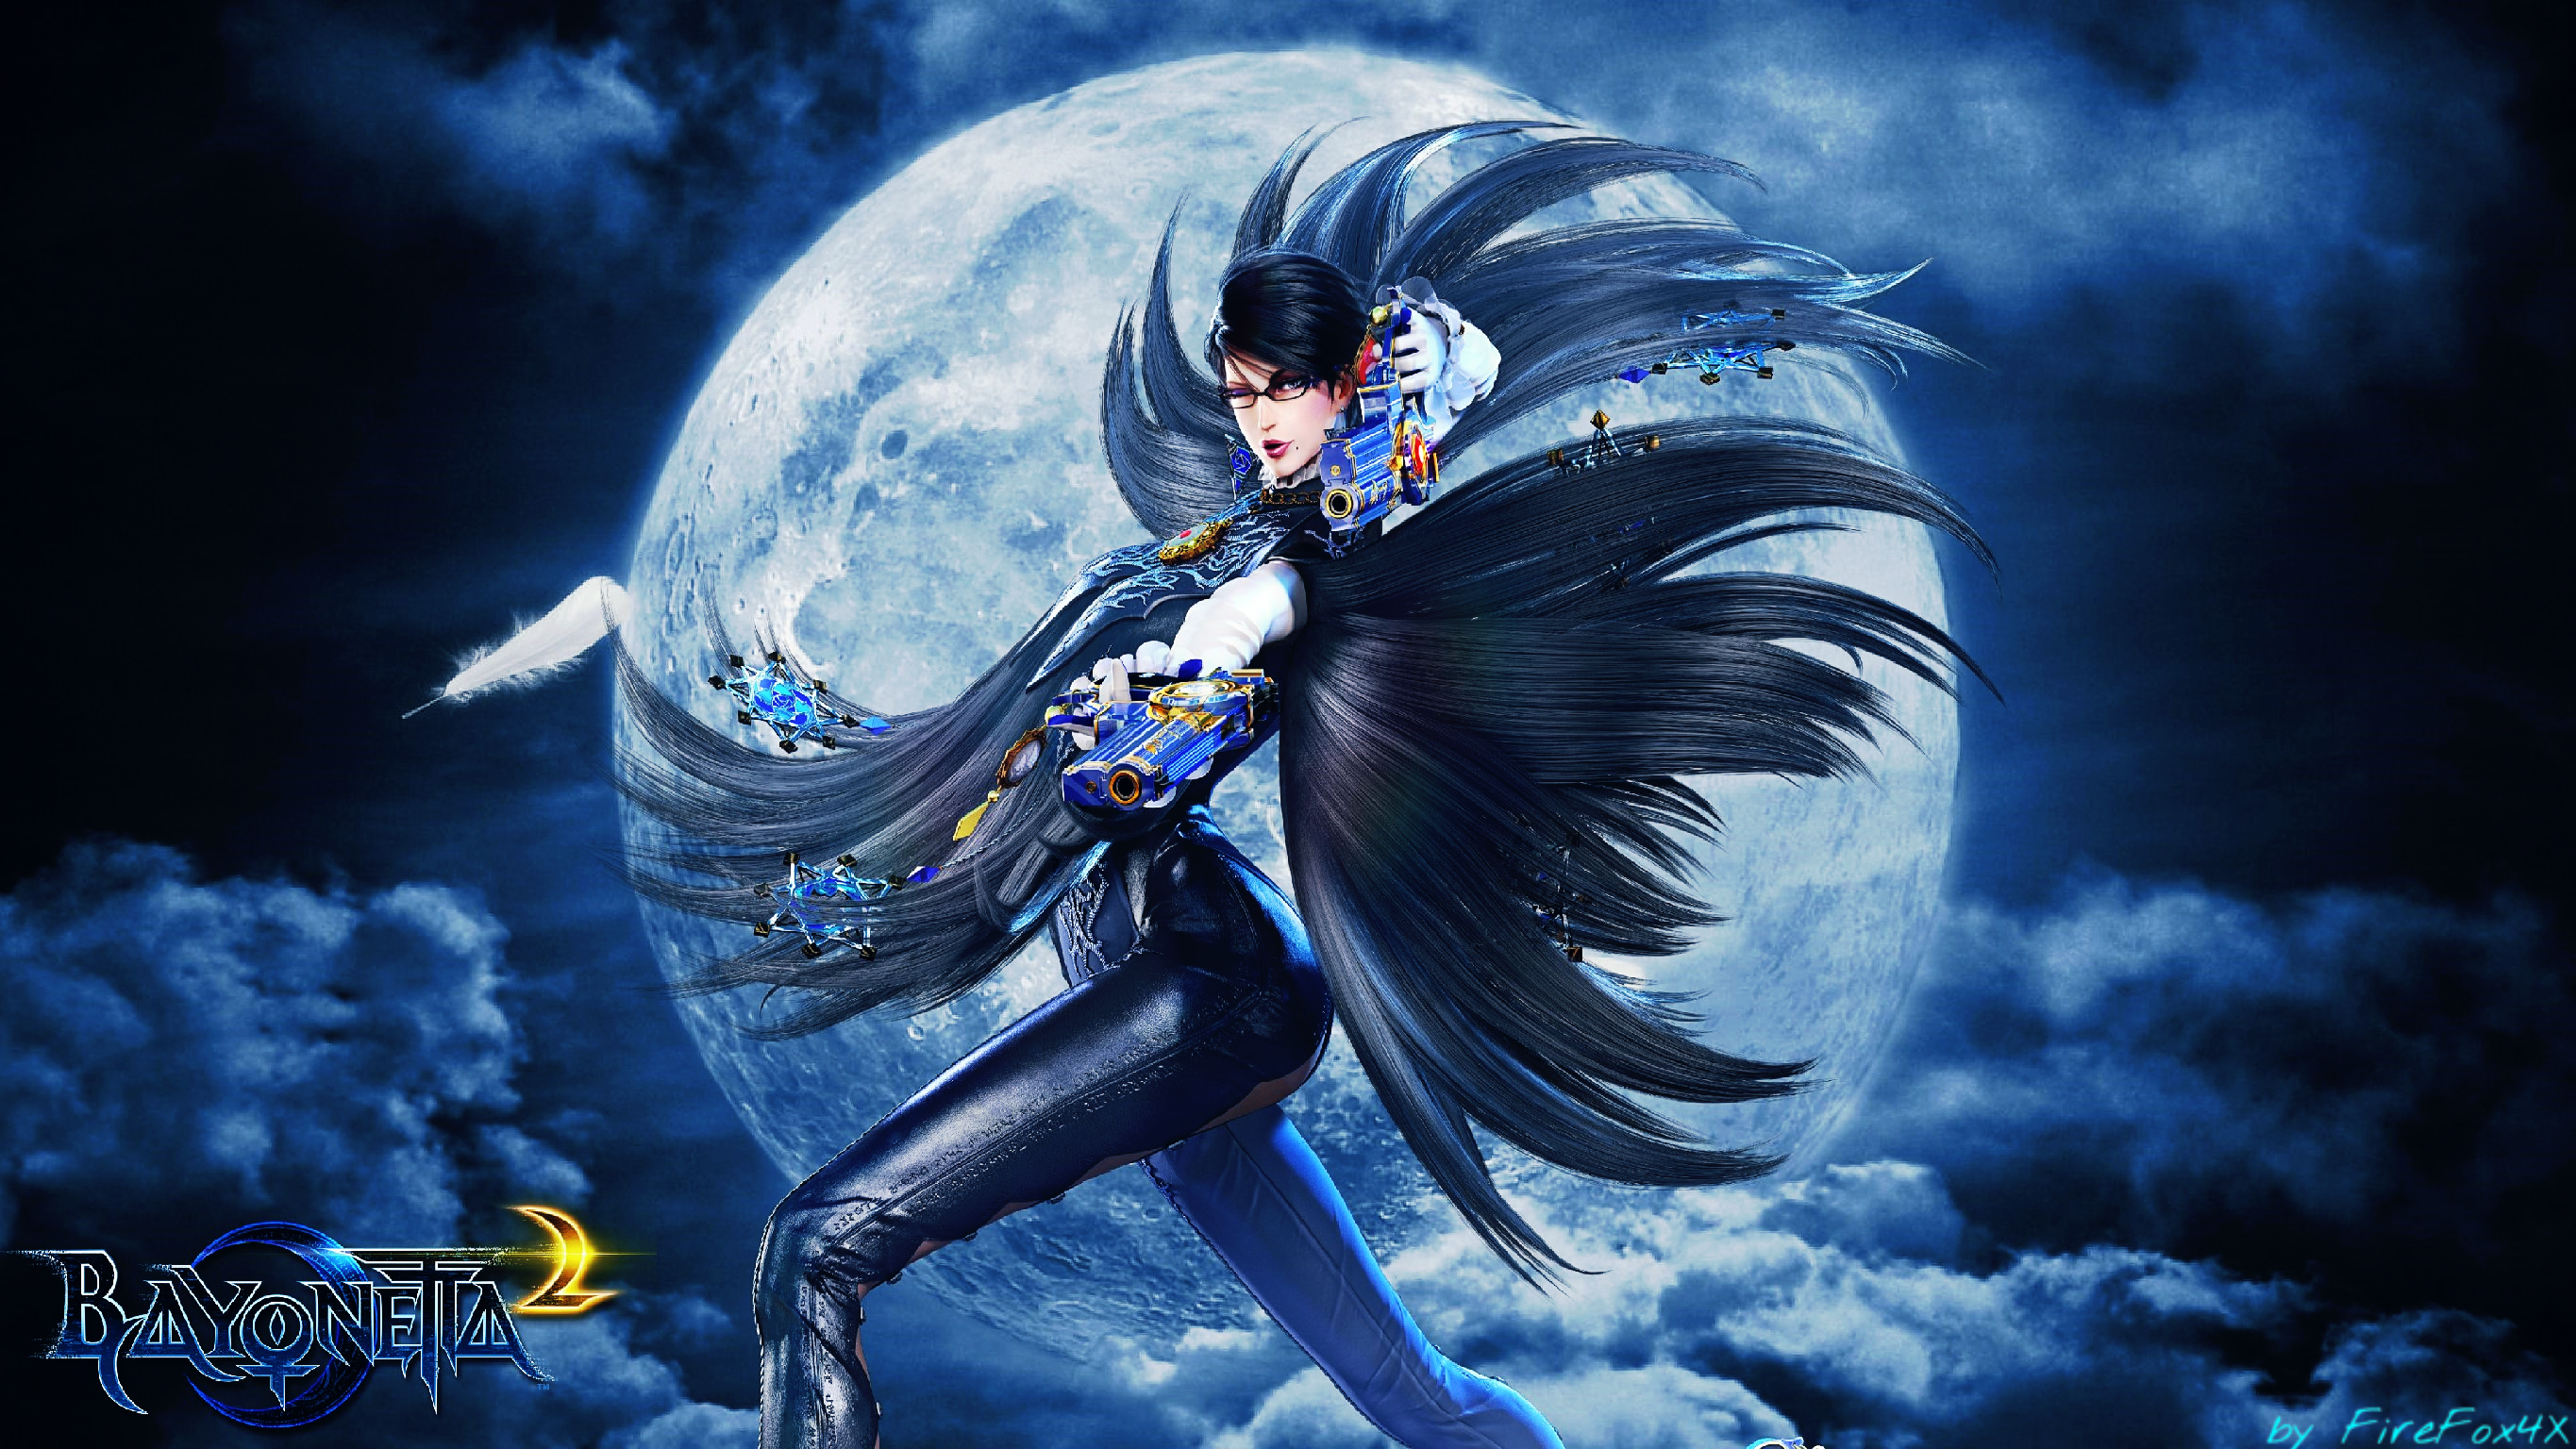 Free Download Bayonetta 2 Wallpaper By Firefox4x 2730x1536 For Your Desktop Mobile Tablet Explore 74 Bayonetta Wallpaper Nintendo Wallpapers Bayonetta Wallpaper 1080p Bayonetta Iphone Wallpaper